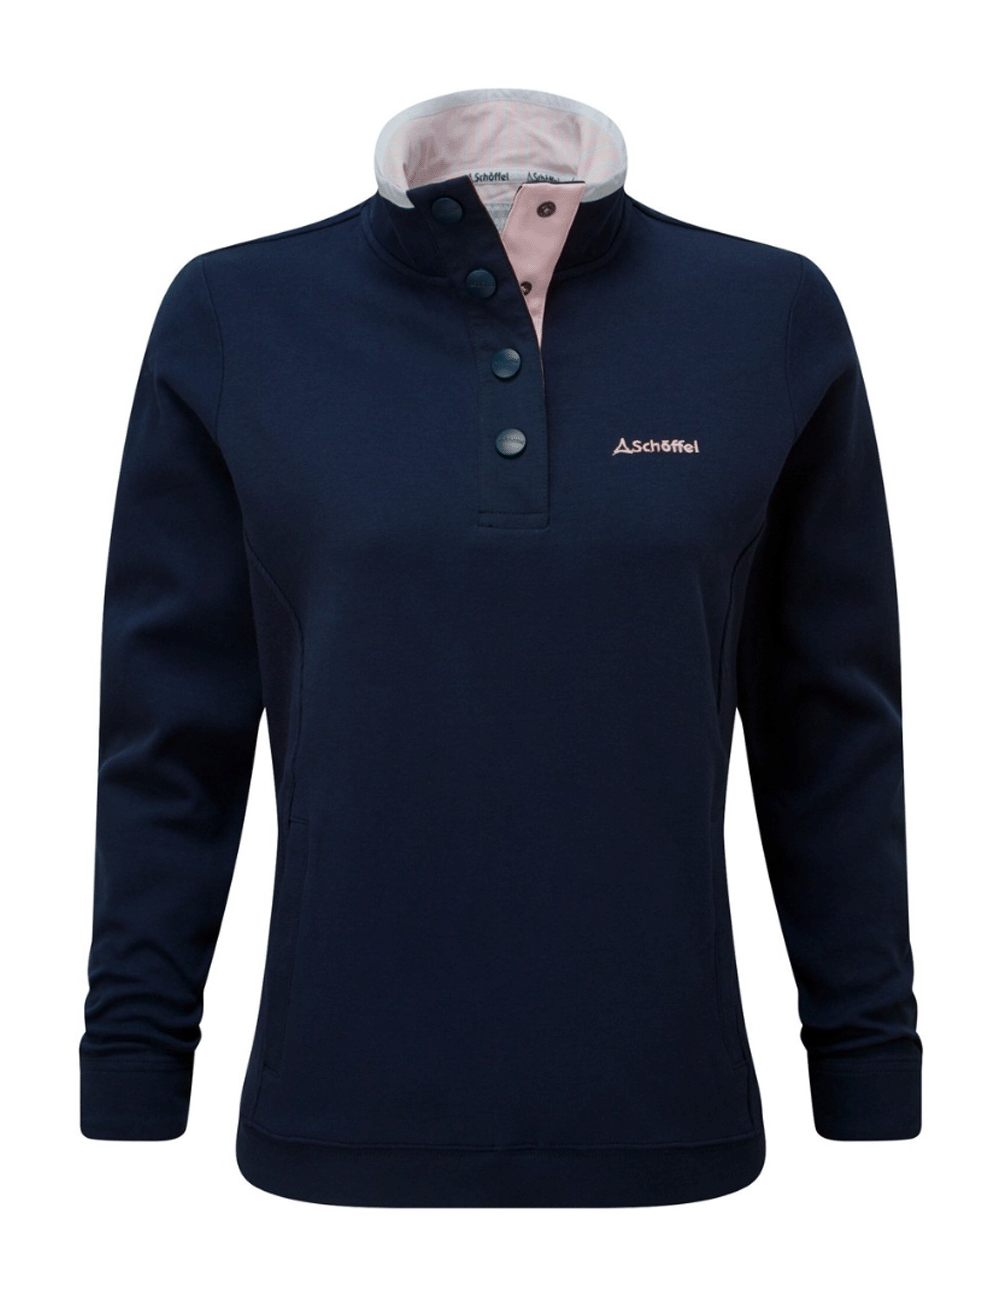 Schoffel's Steephill Cove Sweatshirt in Navy on a white background